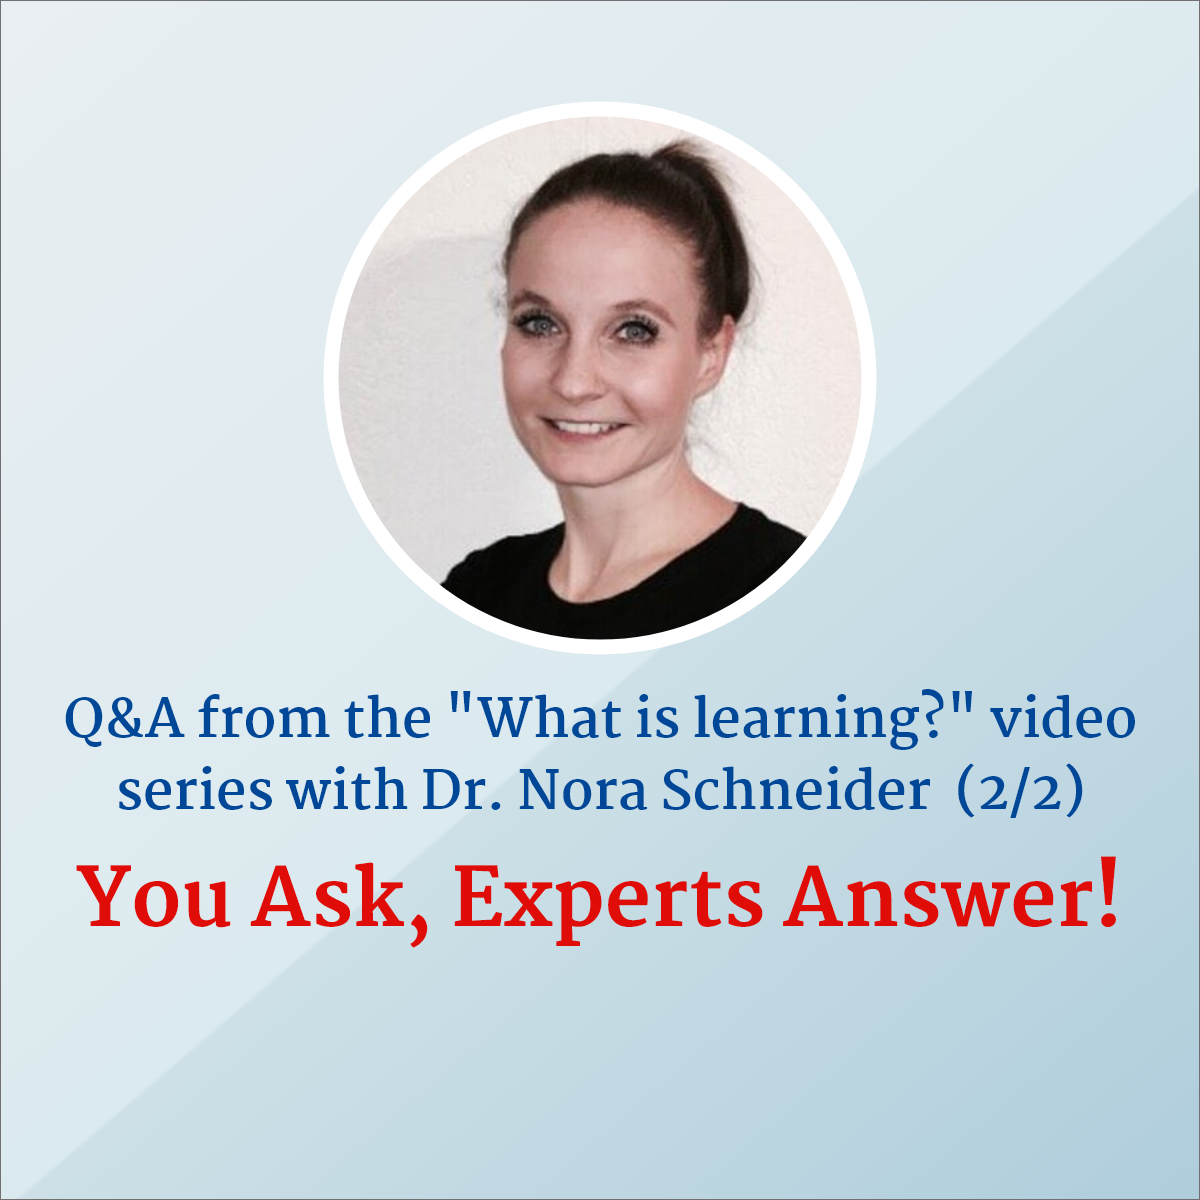 Q&A from the "What is Learning?" video series - Neurobiology of Learning - Dr. Nora Schneider